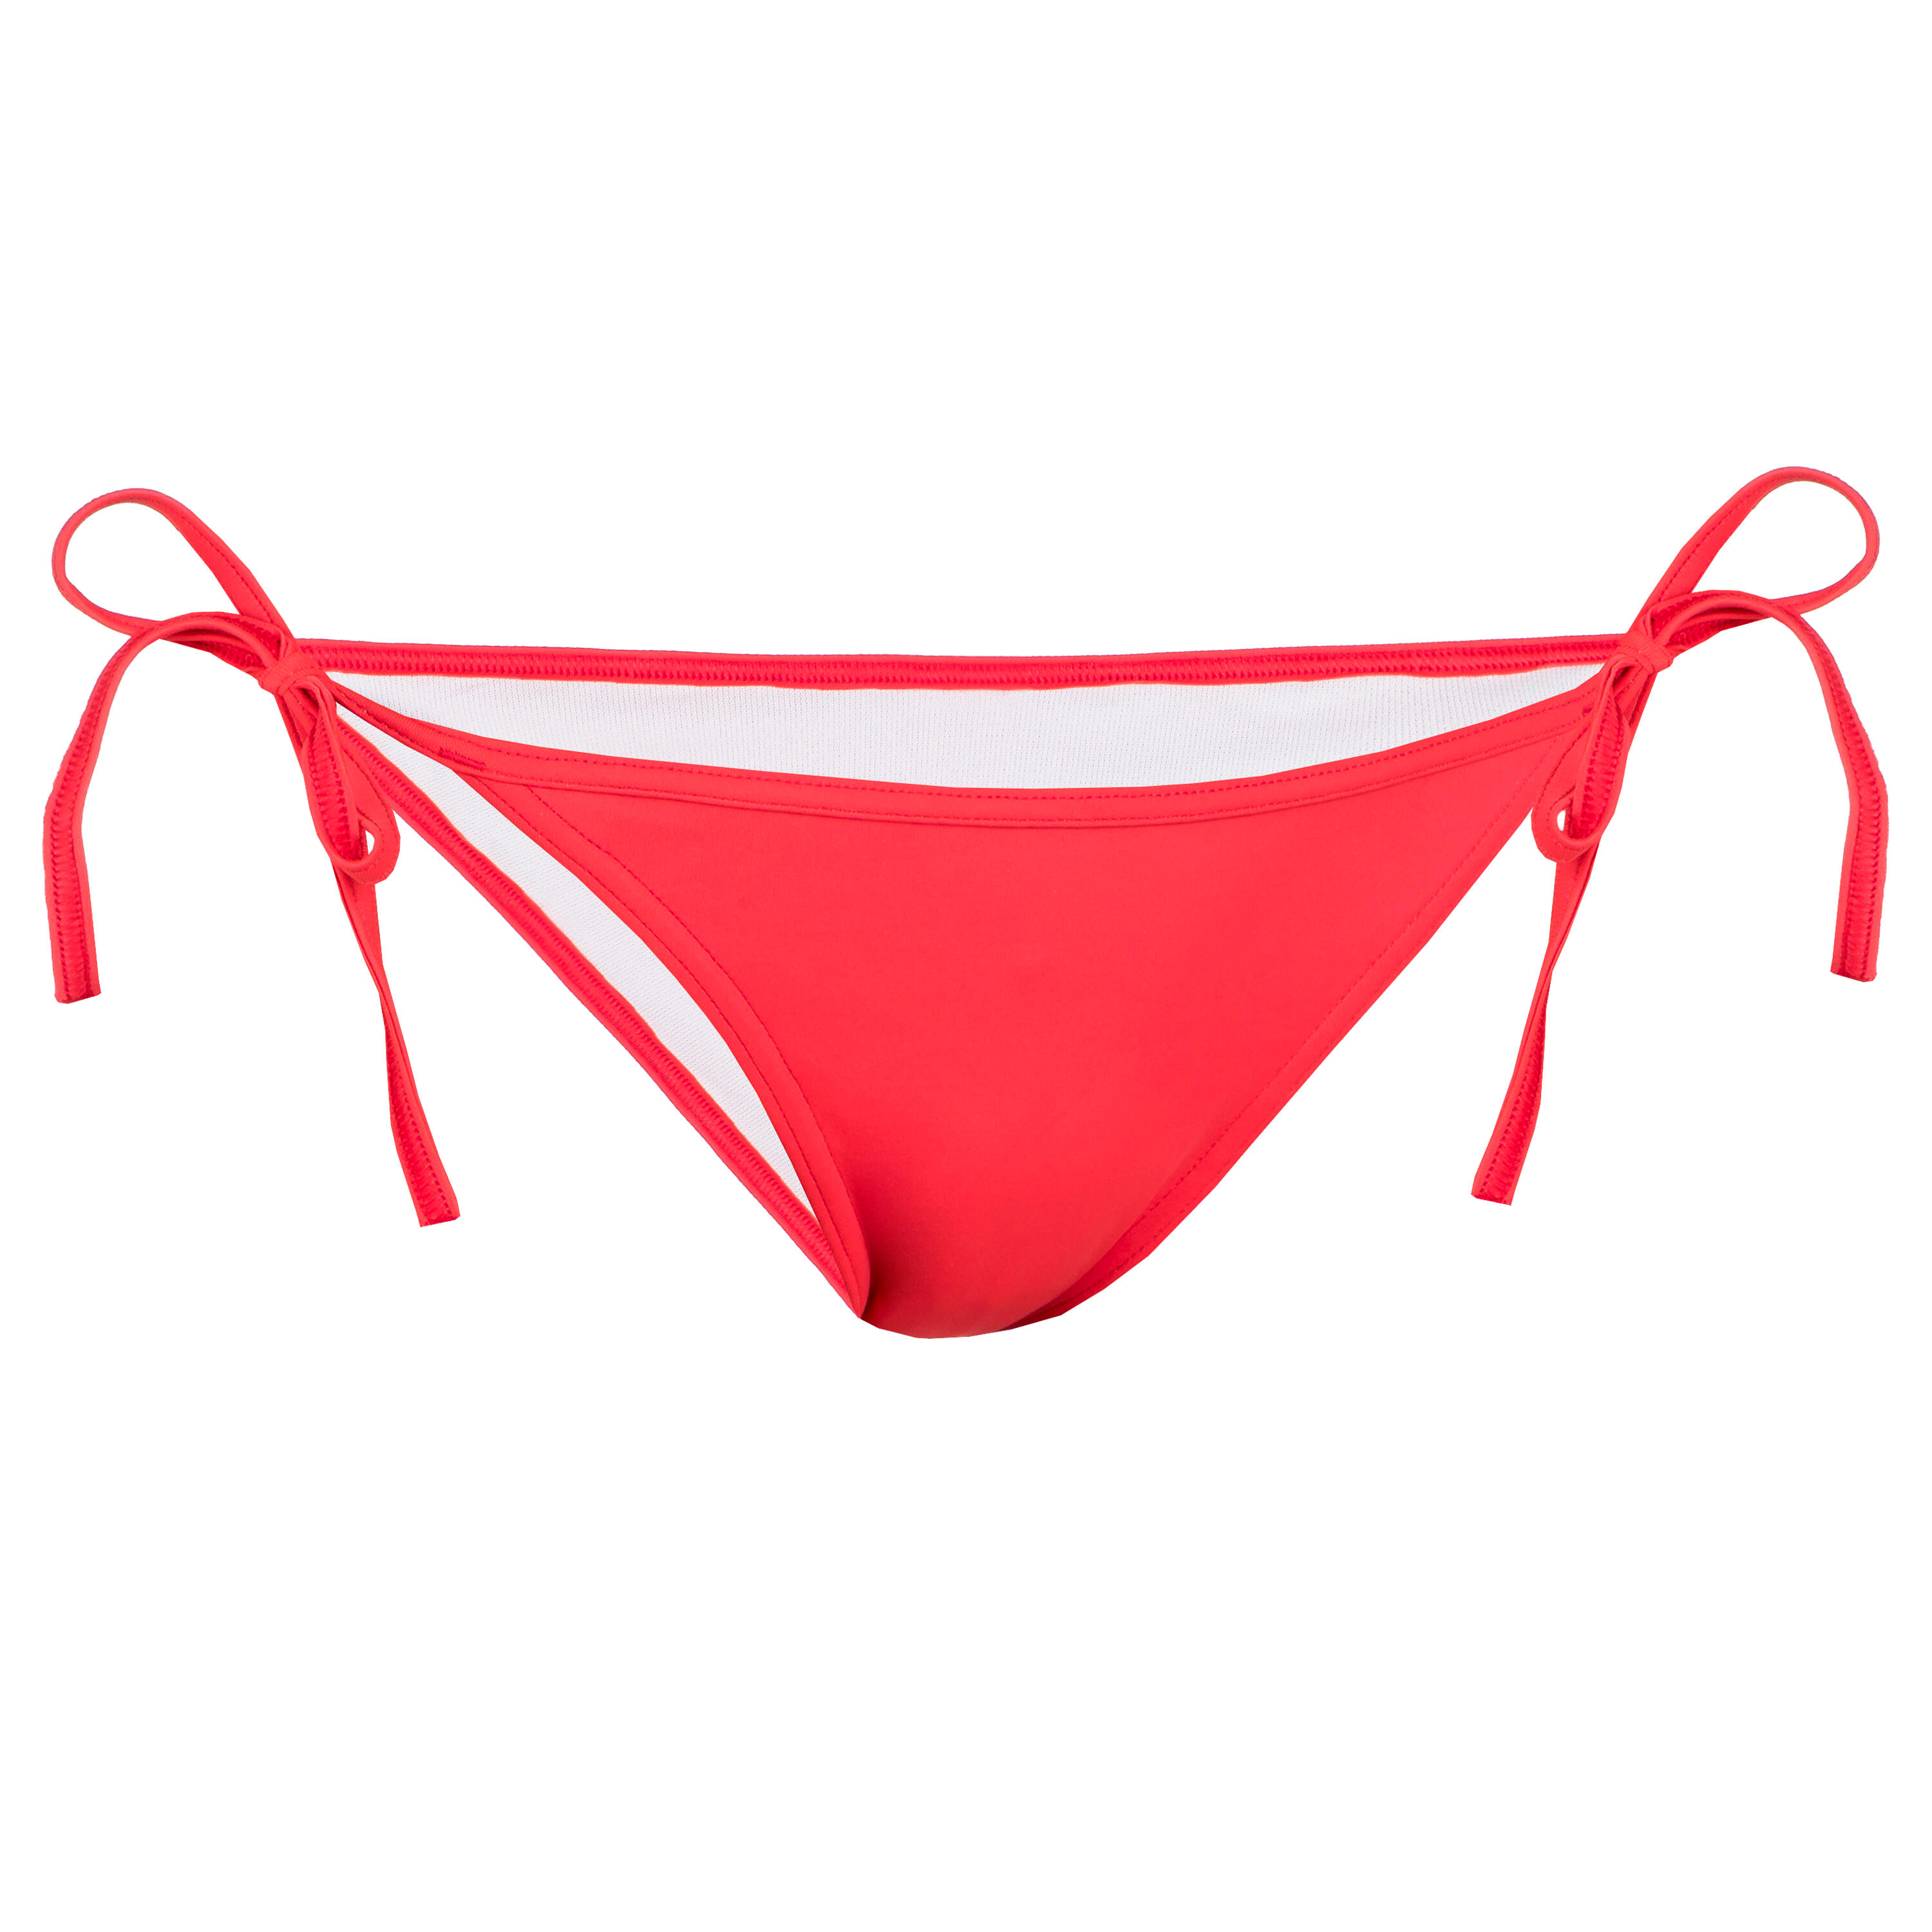 WOMEN'S SURFING KNOTTED BRIEFS SOFY - RED 3/10